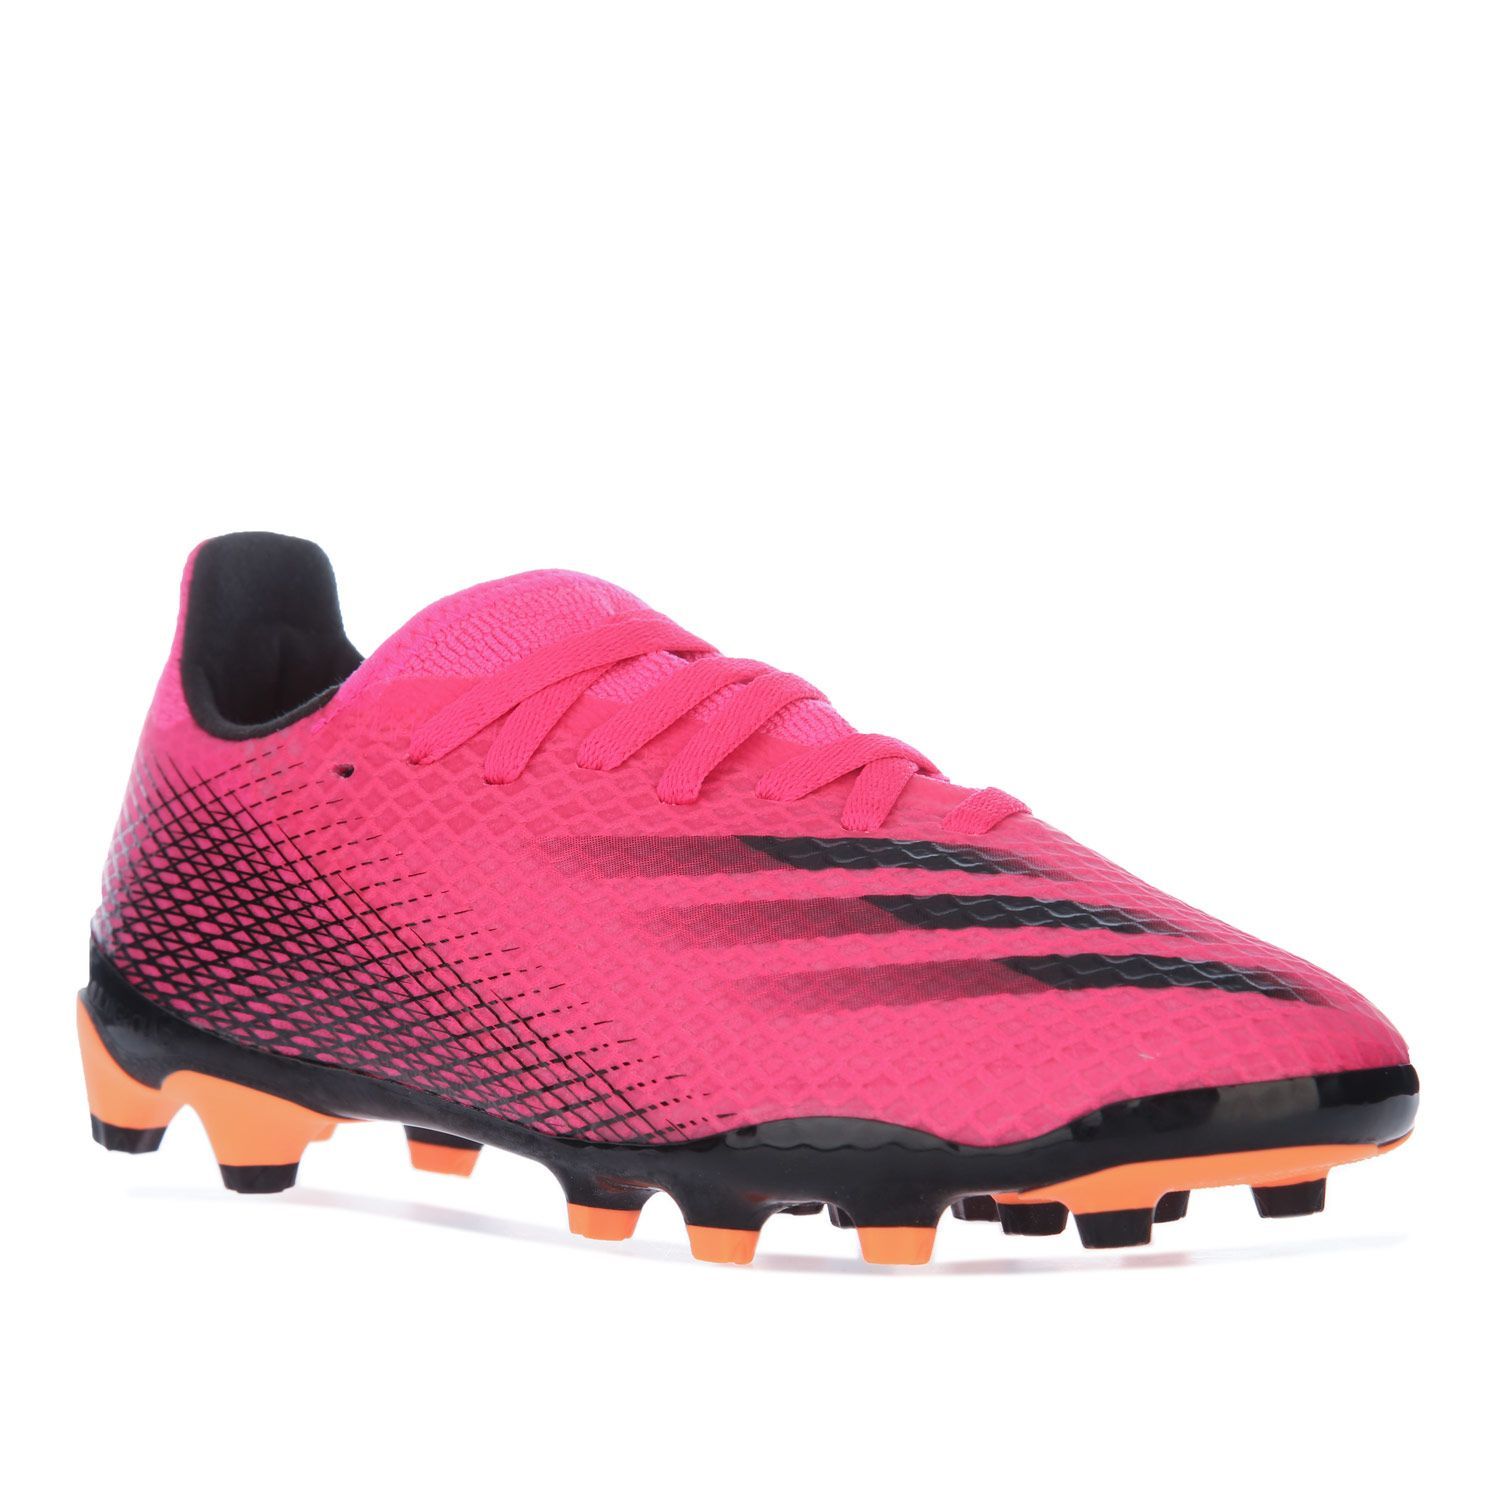 Junior Boys adidas X Ghosted.3 MG Football Boots in pink.- Lightweight Speedskin upper.- Lace fastening.- Stretch tongue for easy entry.- Lightly padded ankle.- TPU soleplate with moulded studs.- Lightweight EVA midsole.- Lightweight rubber outsole.- Textile and synthetic upper  Textile lining  Synthetic sole.  - Ref: FY1093